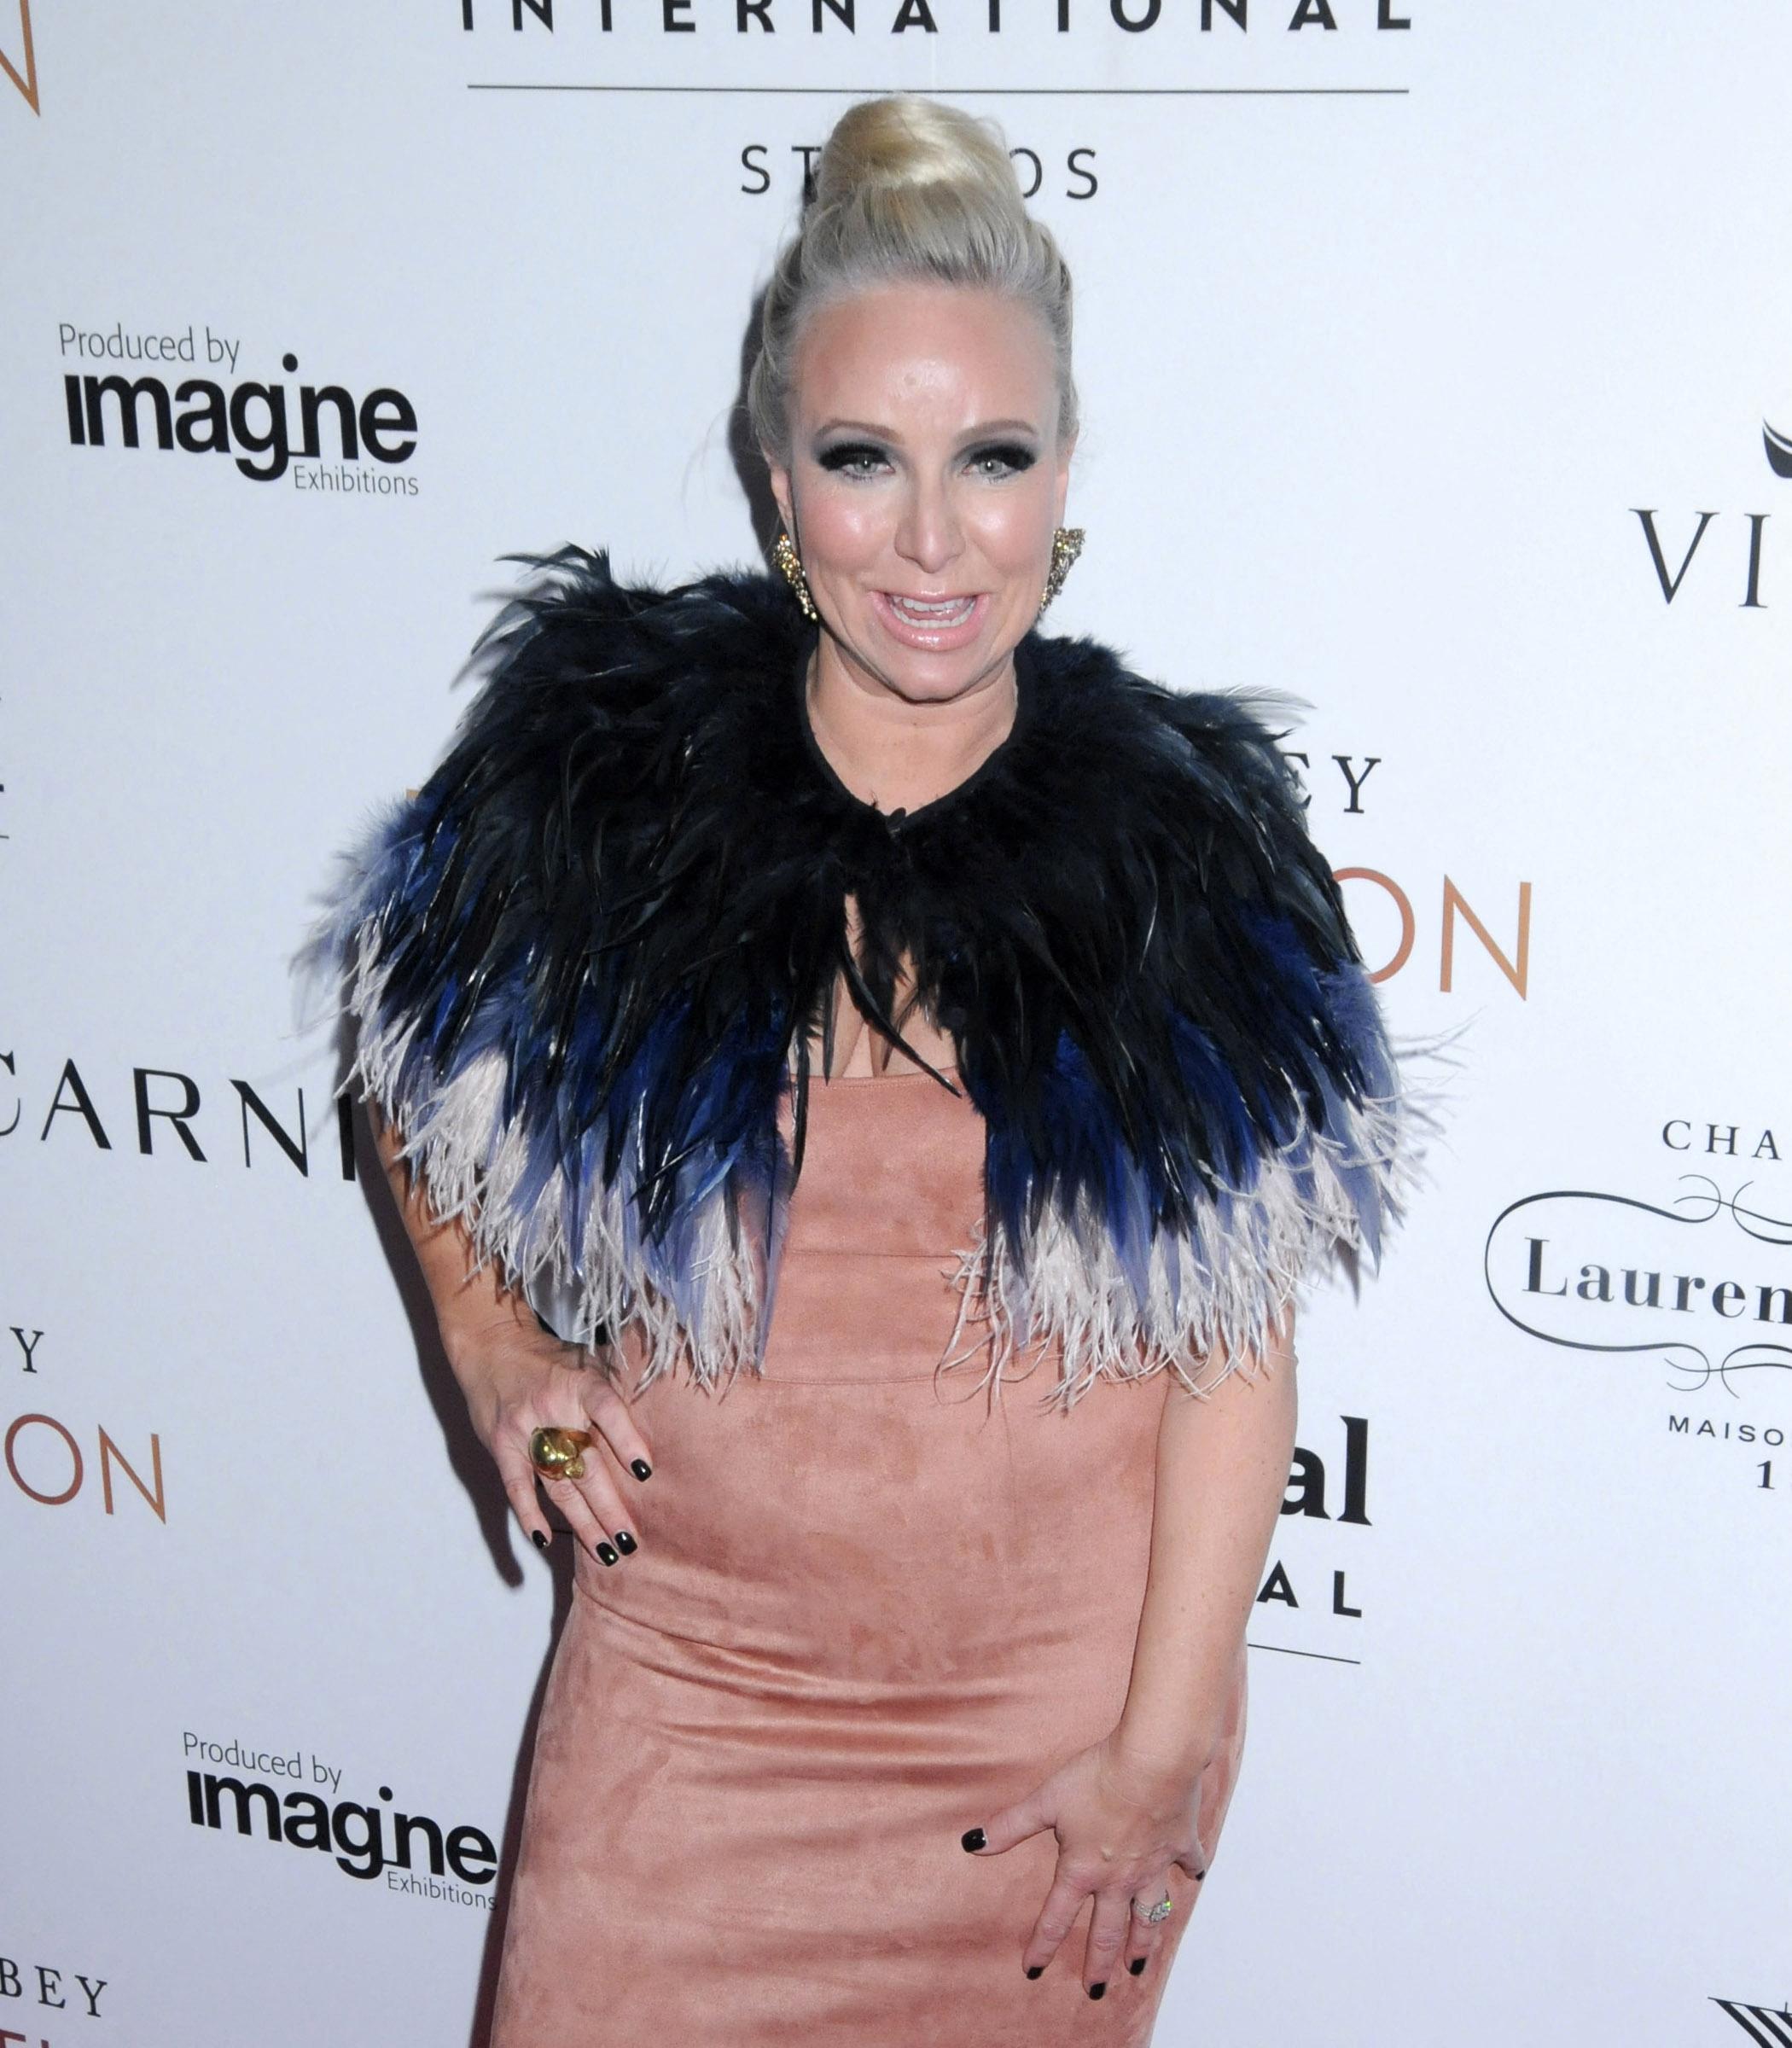 Margaret Josephs at The Exhibition Gala Reception in NYC